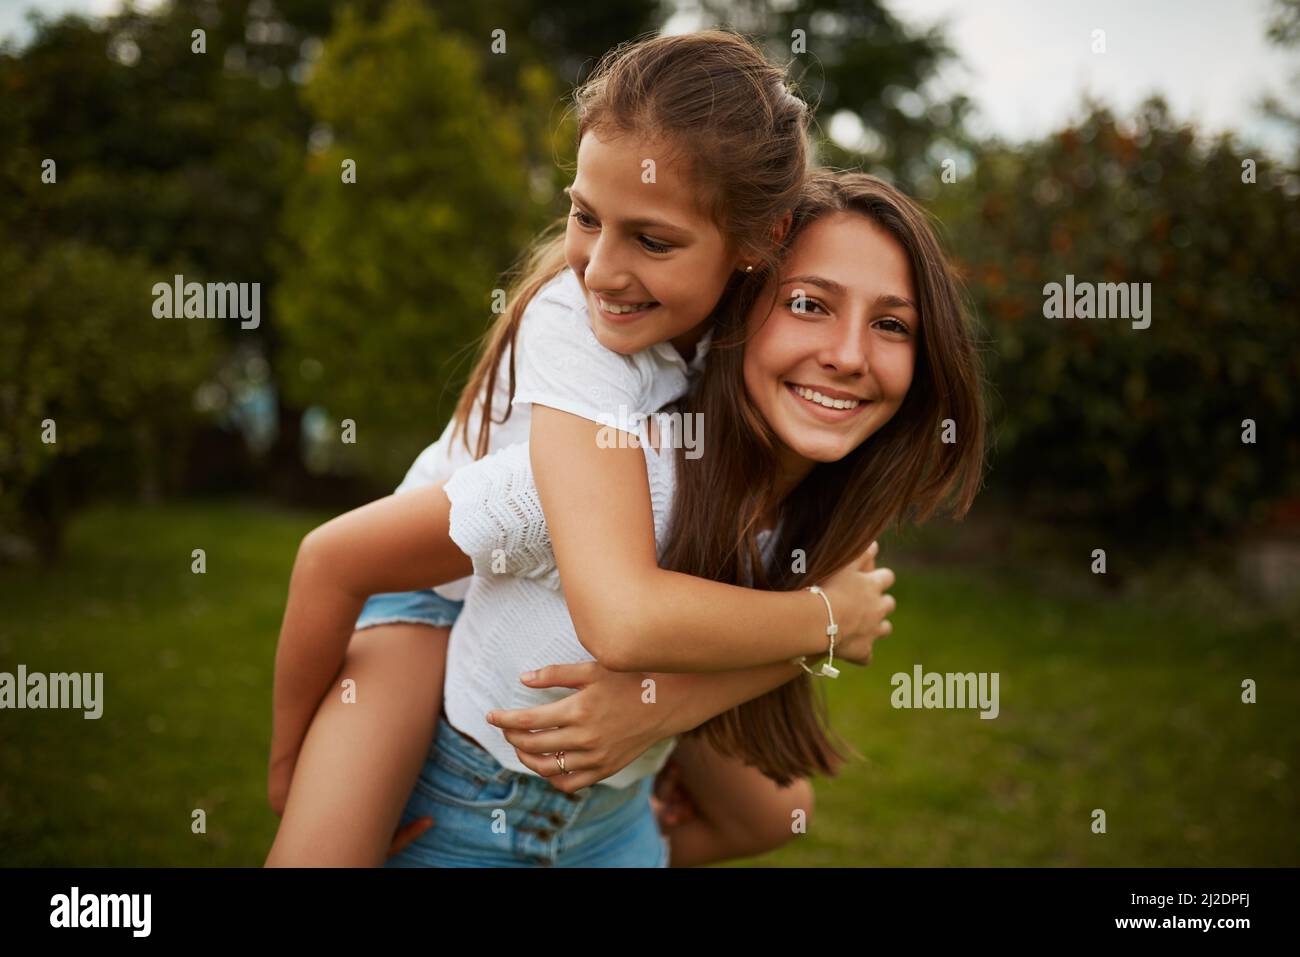 Im her biggest supporter. Cropped portrait of a young girl giving her younger sister a piggyback ride outdoors. Stock Photo